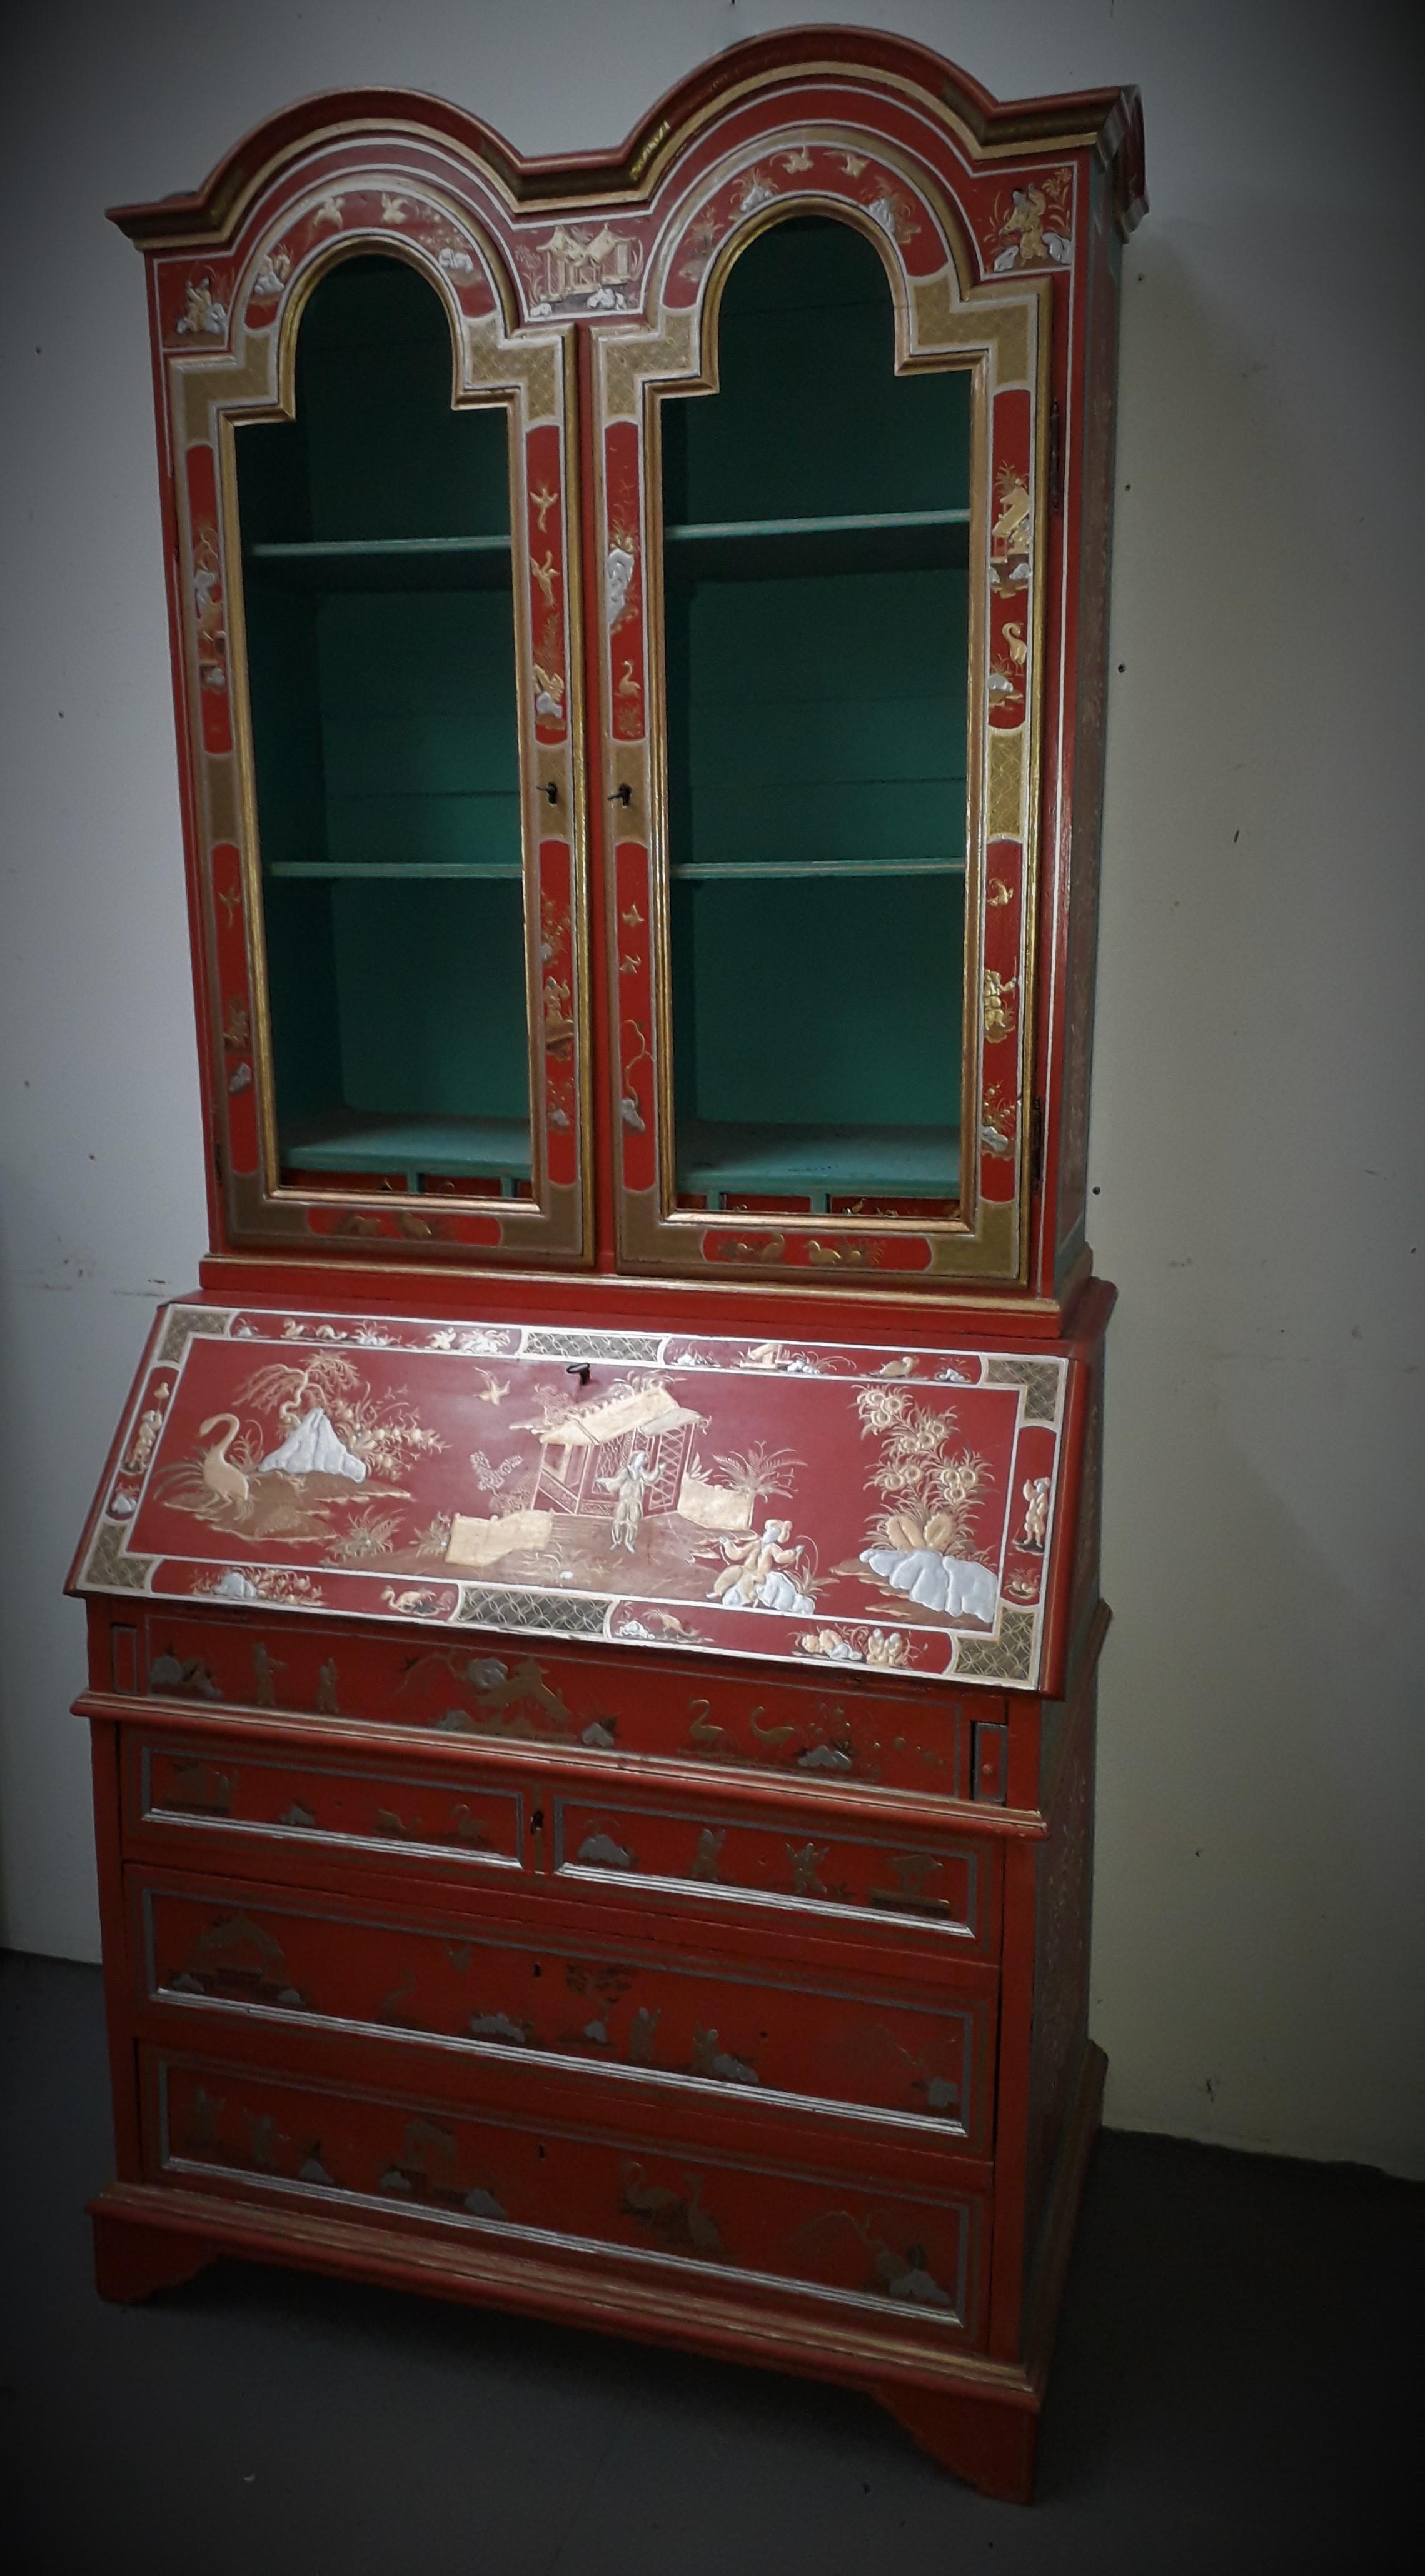 European 18th Century style Chinoiserie Red Lacquer Bureau Bookcase